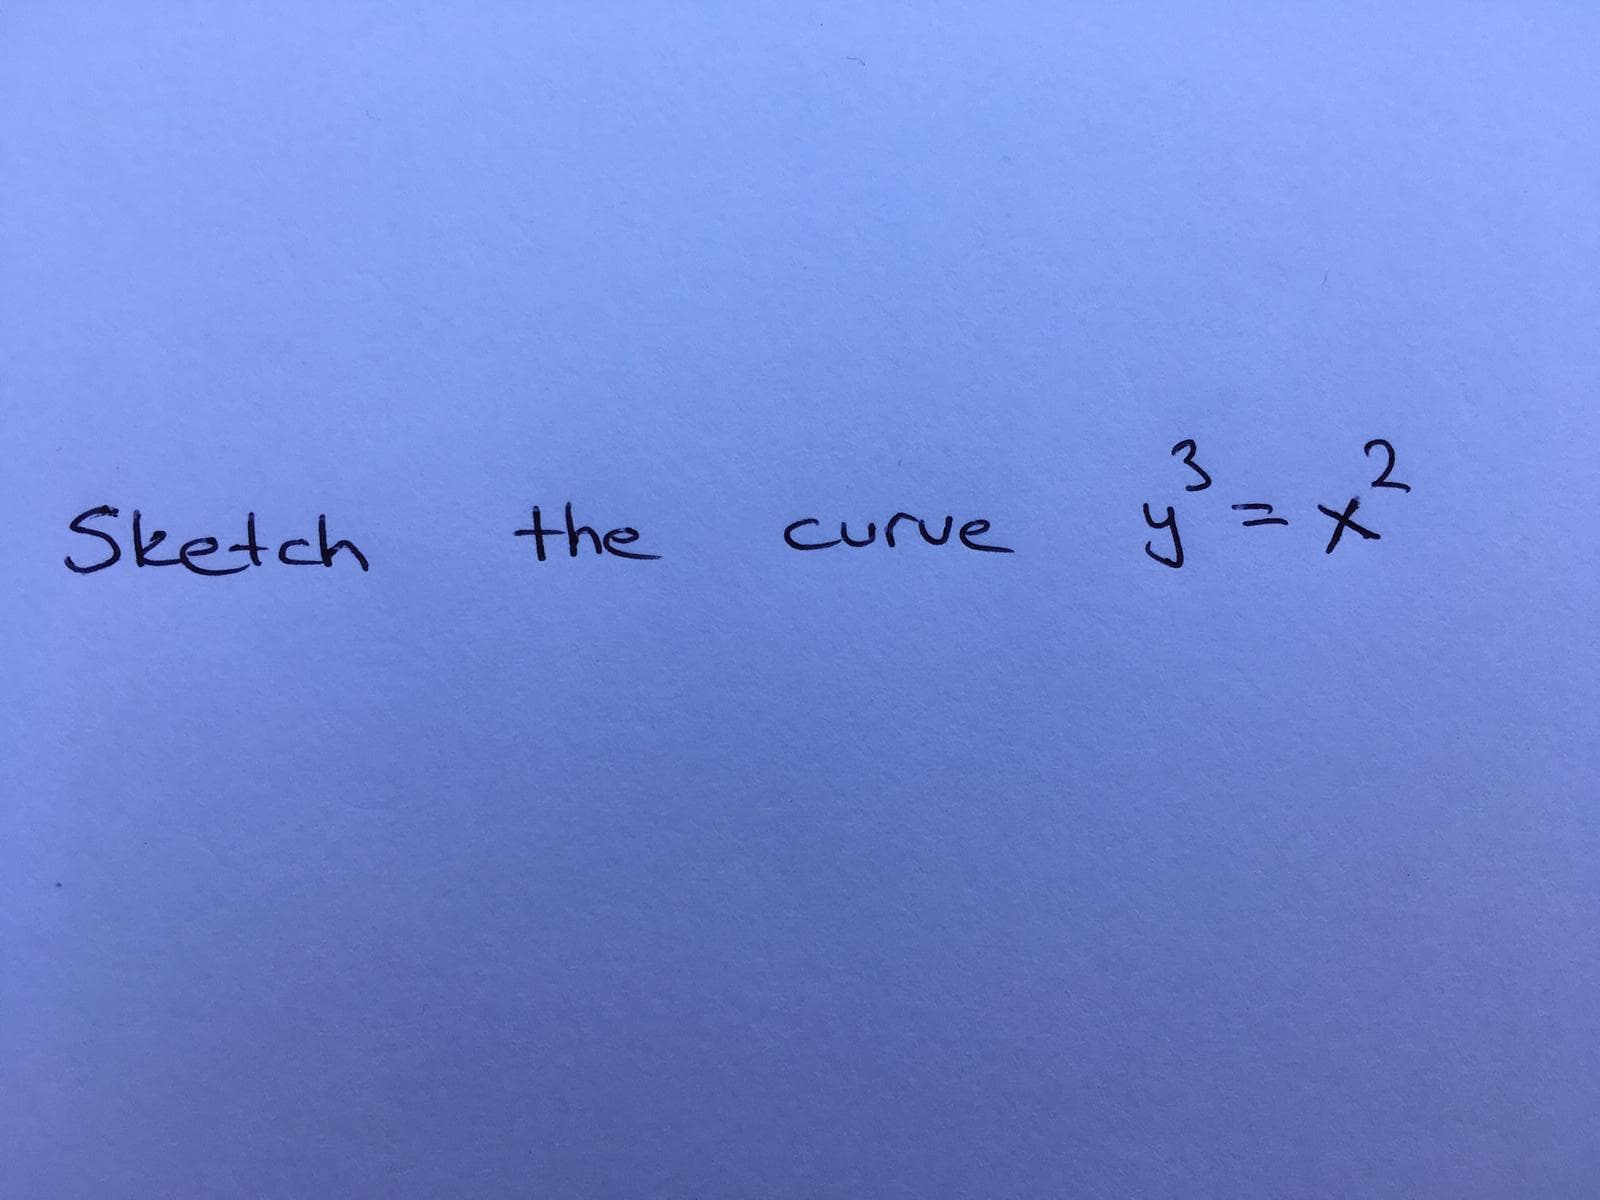 Sketch the
curve
:-
